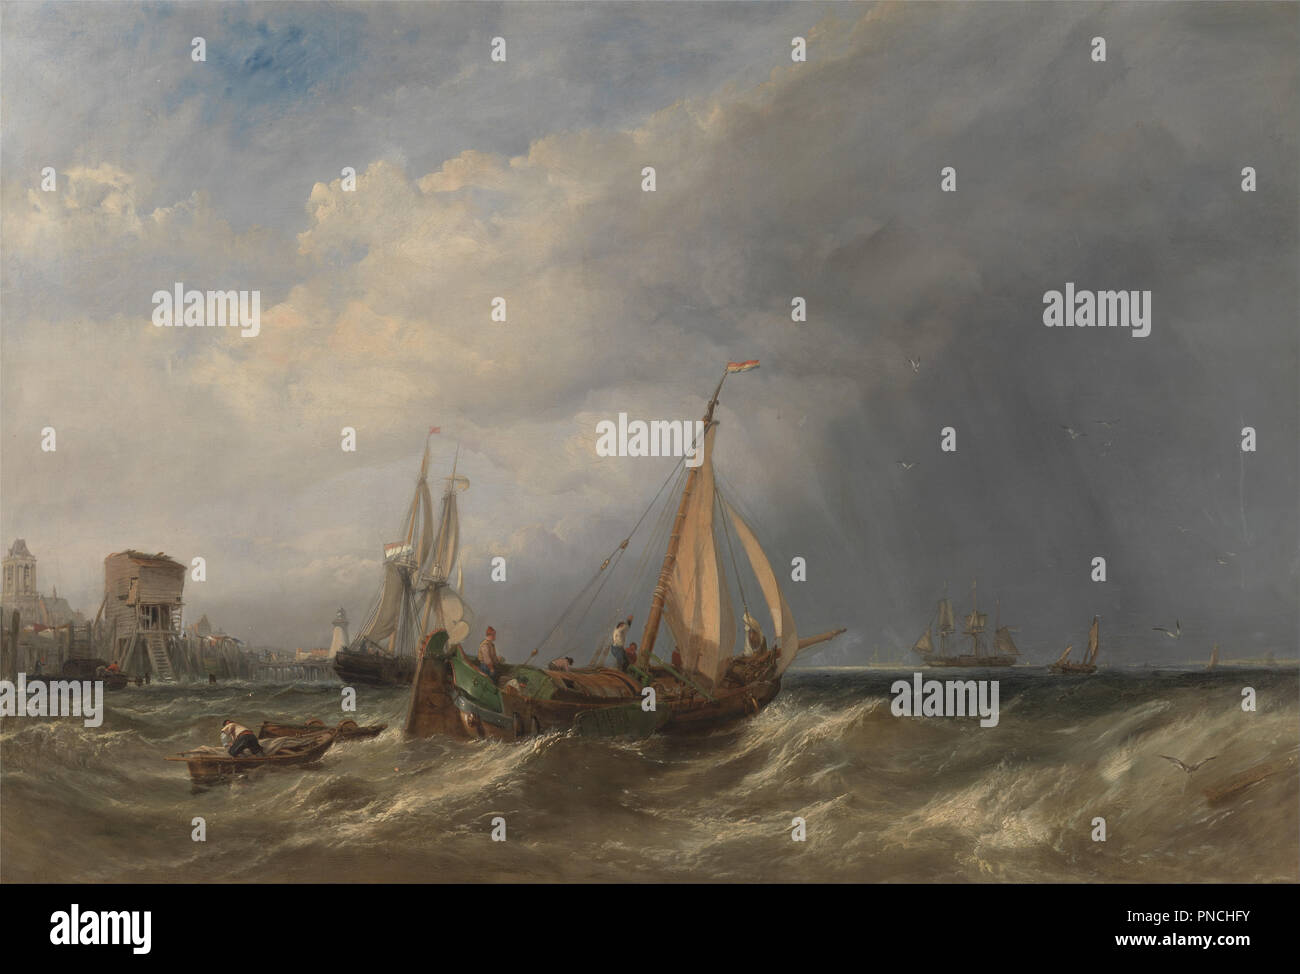 A Dutch Barge and Merchantmen Running out of Rotterdam. Date/Period: 1856. Painting. Oil on canvas. Height: 787 mm (30.98 in); Width: 1,219 mm (47.99 in). Author: Clarkson Frederick Stanfield. Stock Photo